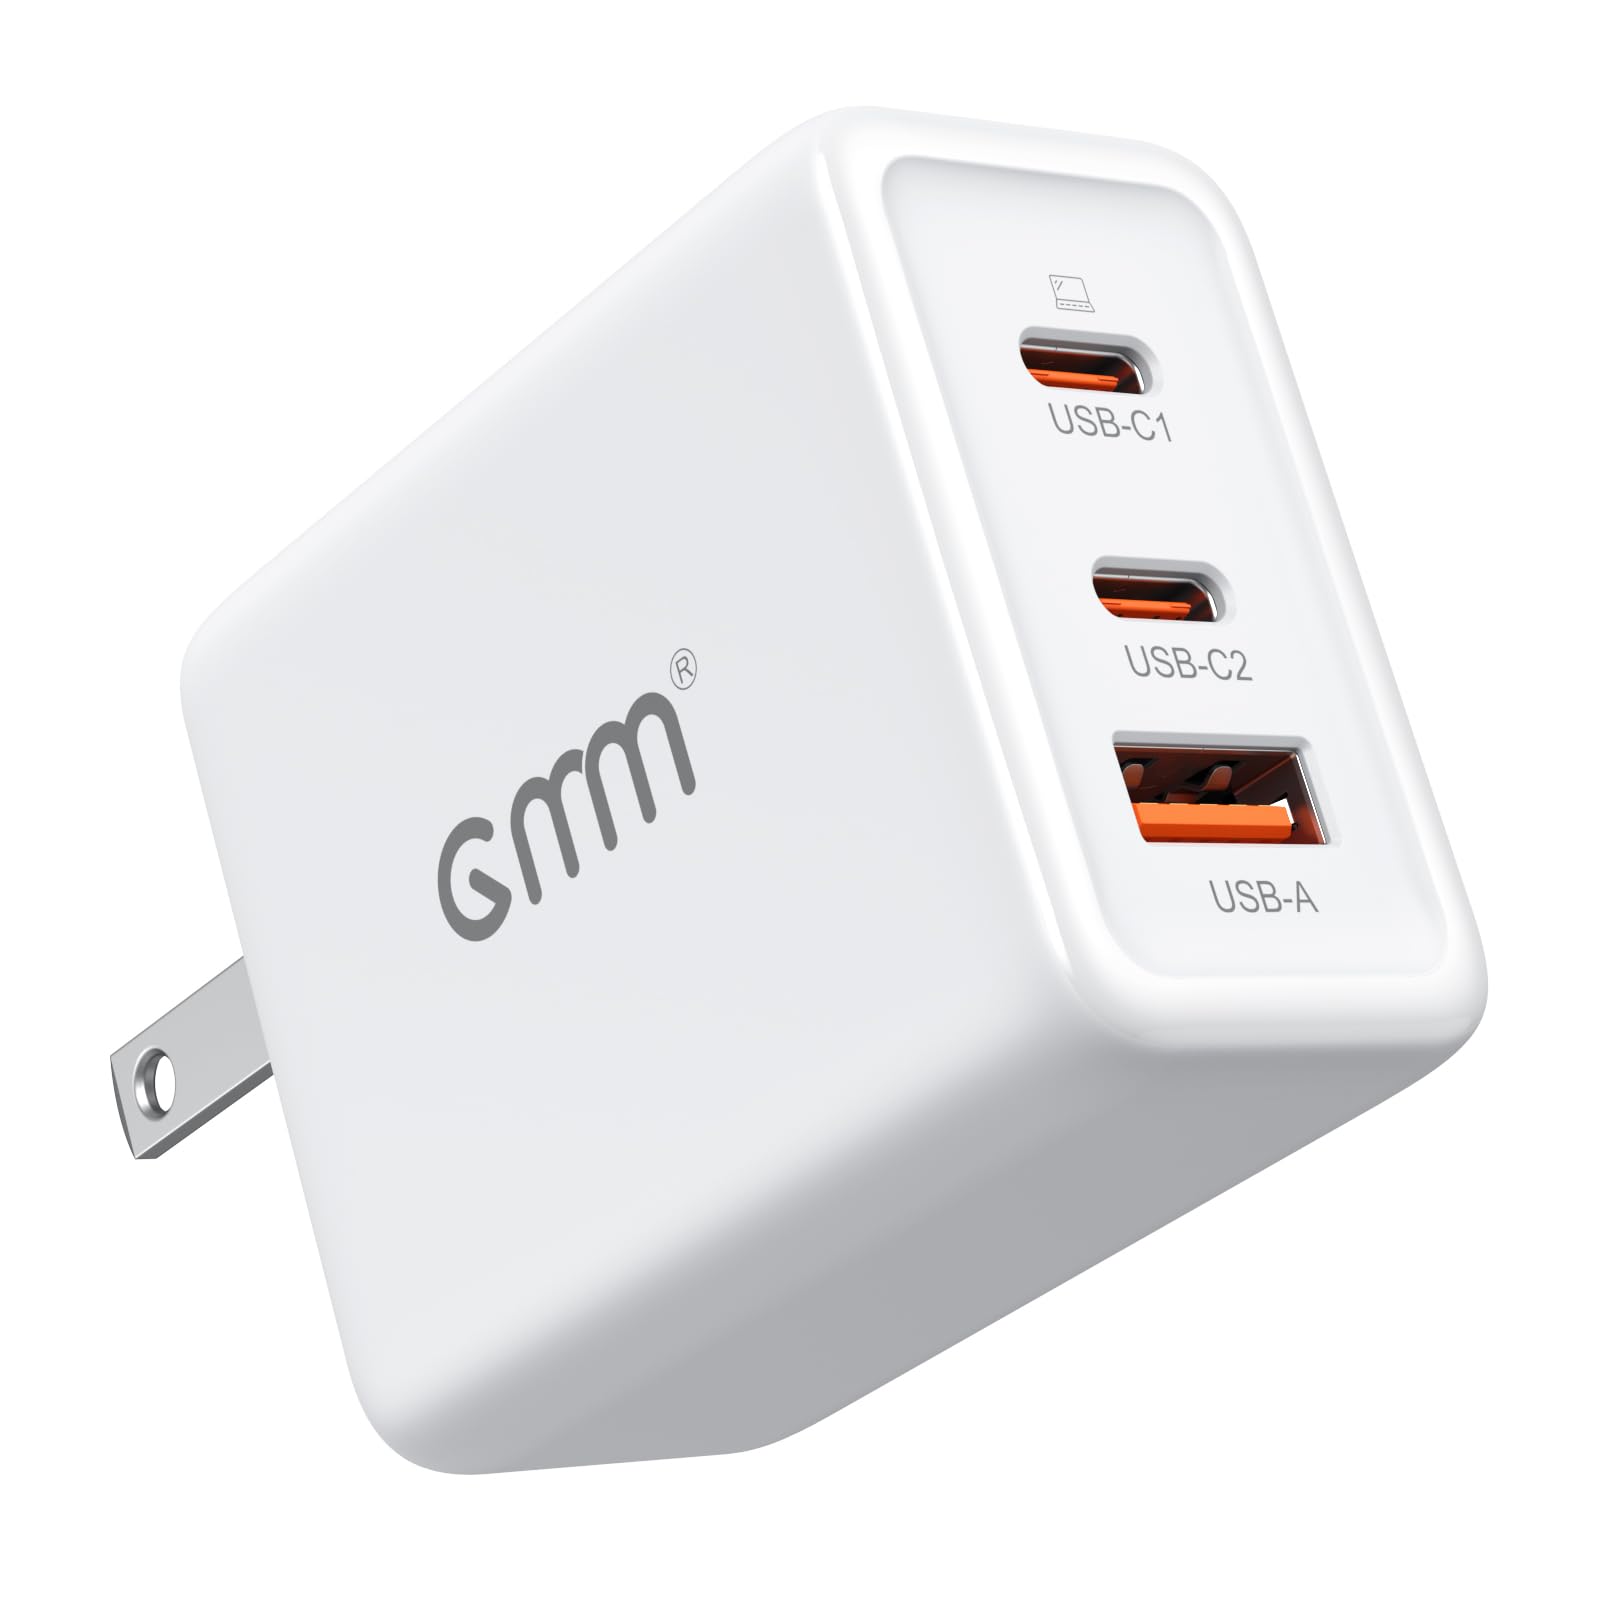 GMM Dual USB C Charger, 65W 3 Ports GaN Fast Charger Block, Compact Foldable Wall Charger for MacBook Pro/Air, iPhone 15 14, Apple Watch, iPad Pro, Galaxy S23, Pixel etc